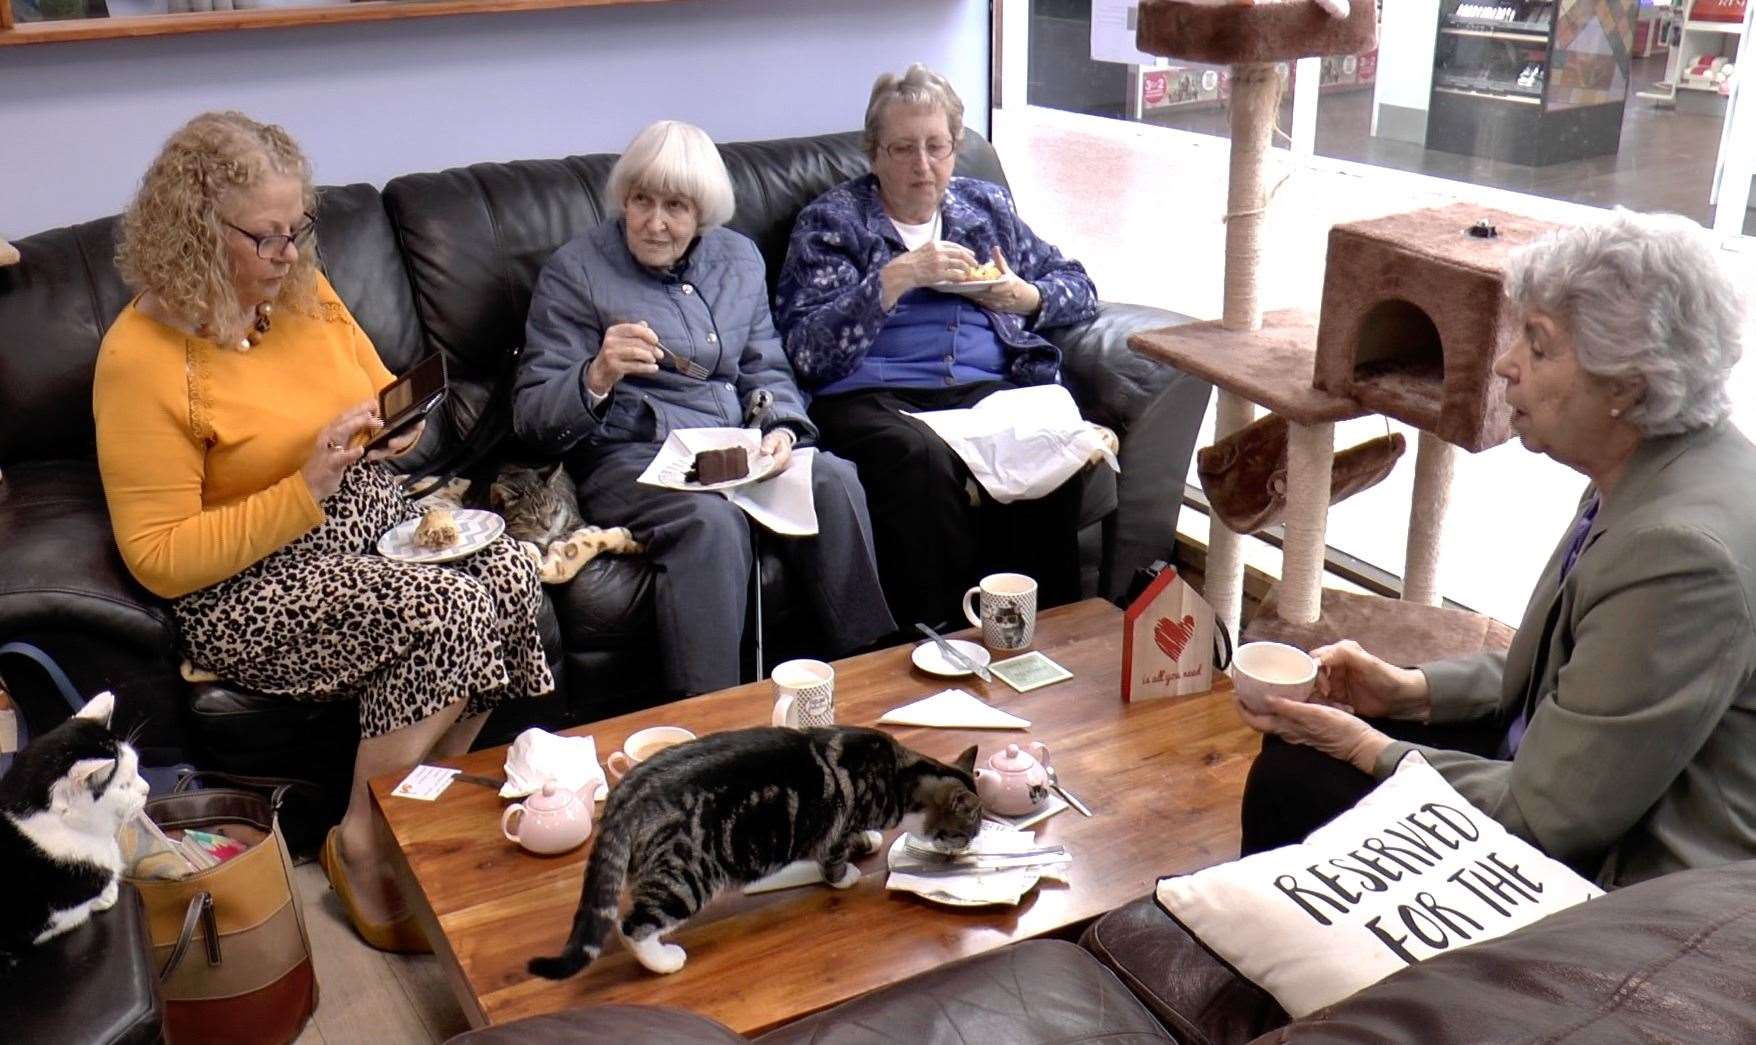 Pensioners enjoy a brew with some feline friends at Paws Cat Cafe